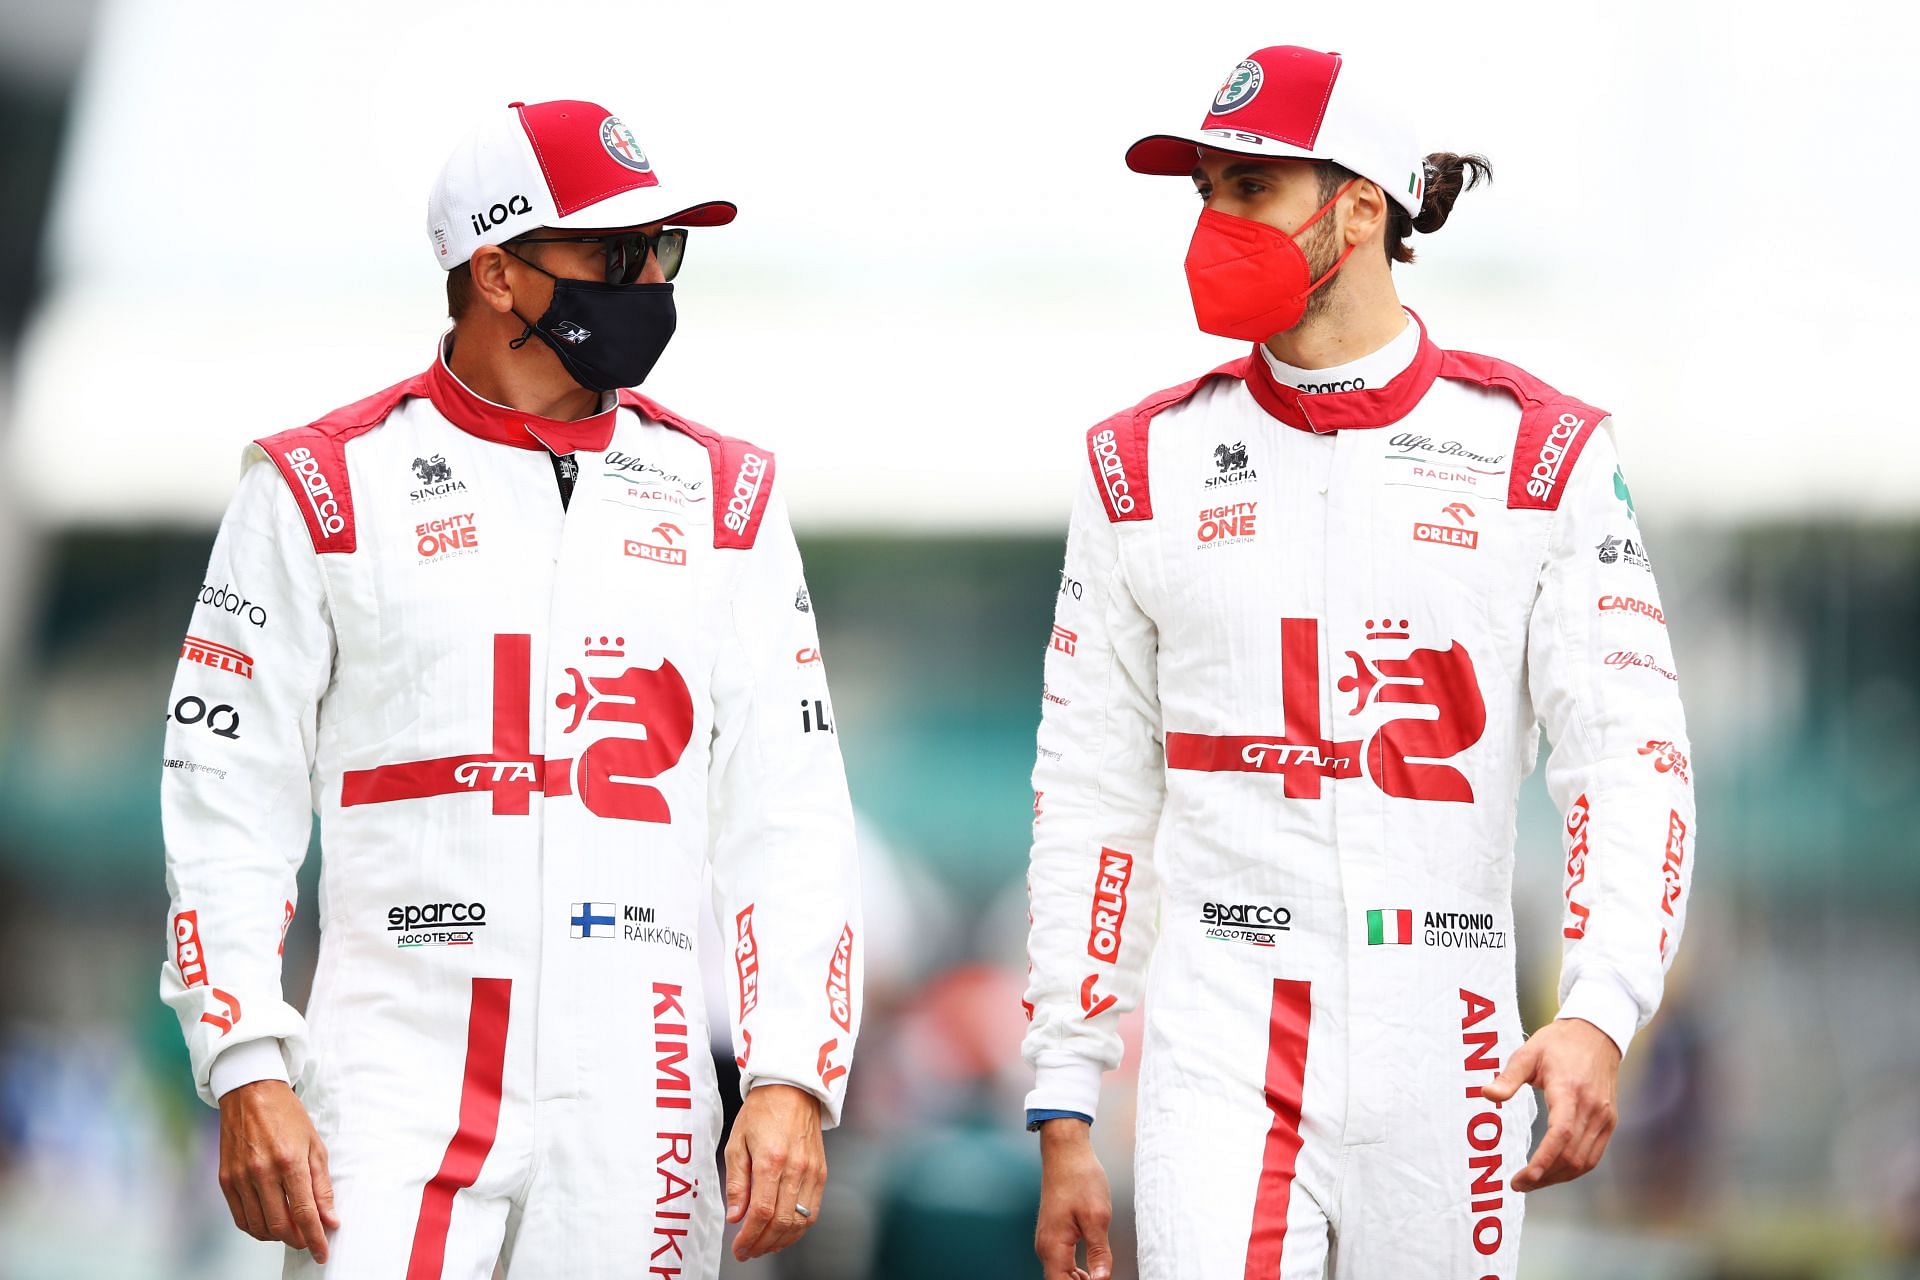 Kimi Raikkonen and Antonio Giovinazzi talk during previews ahead of the 2021 British GP. (Photo by Mark Thompson/Getty Images)